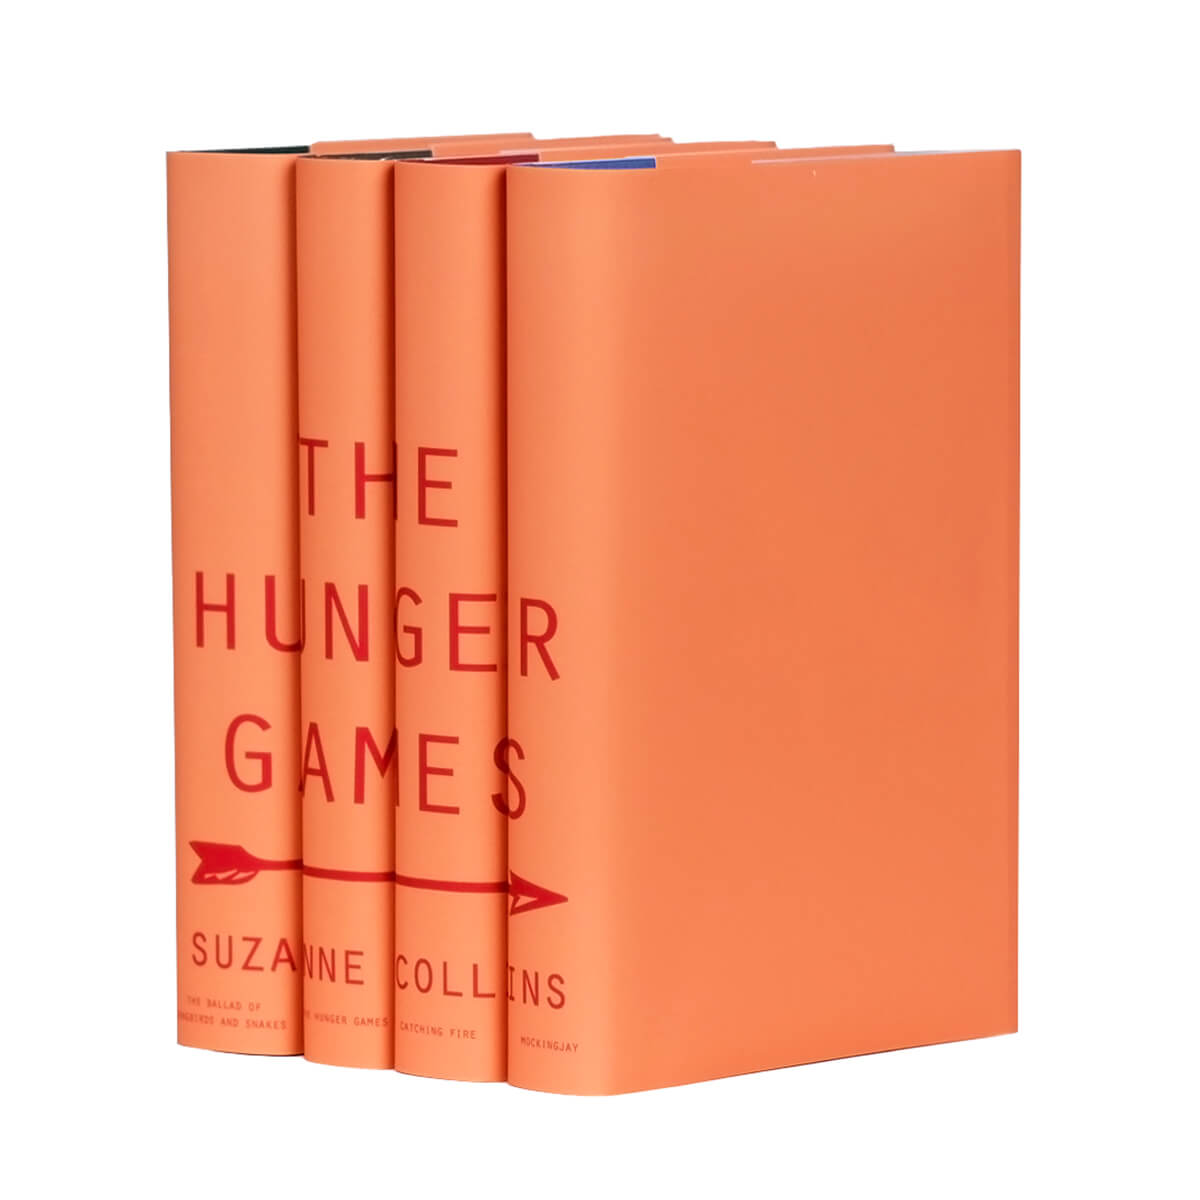 Hunger Games book set by Suzanne Collins, Hardcover